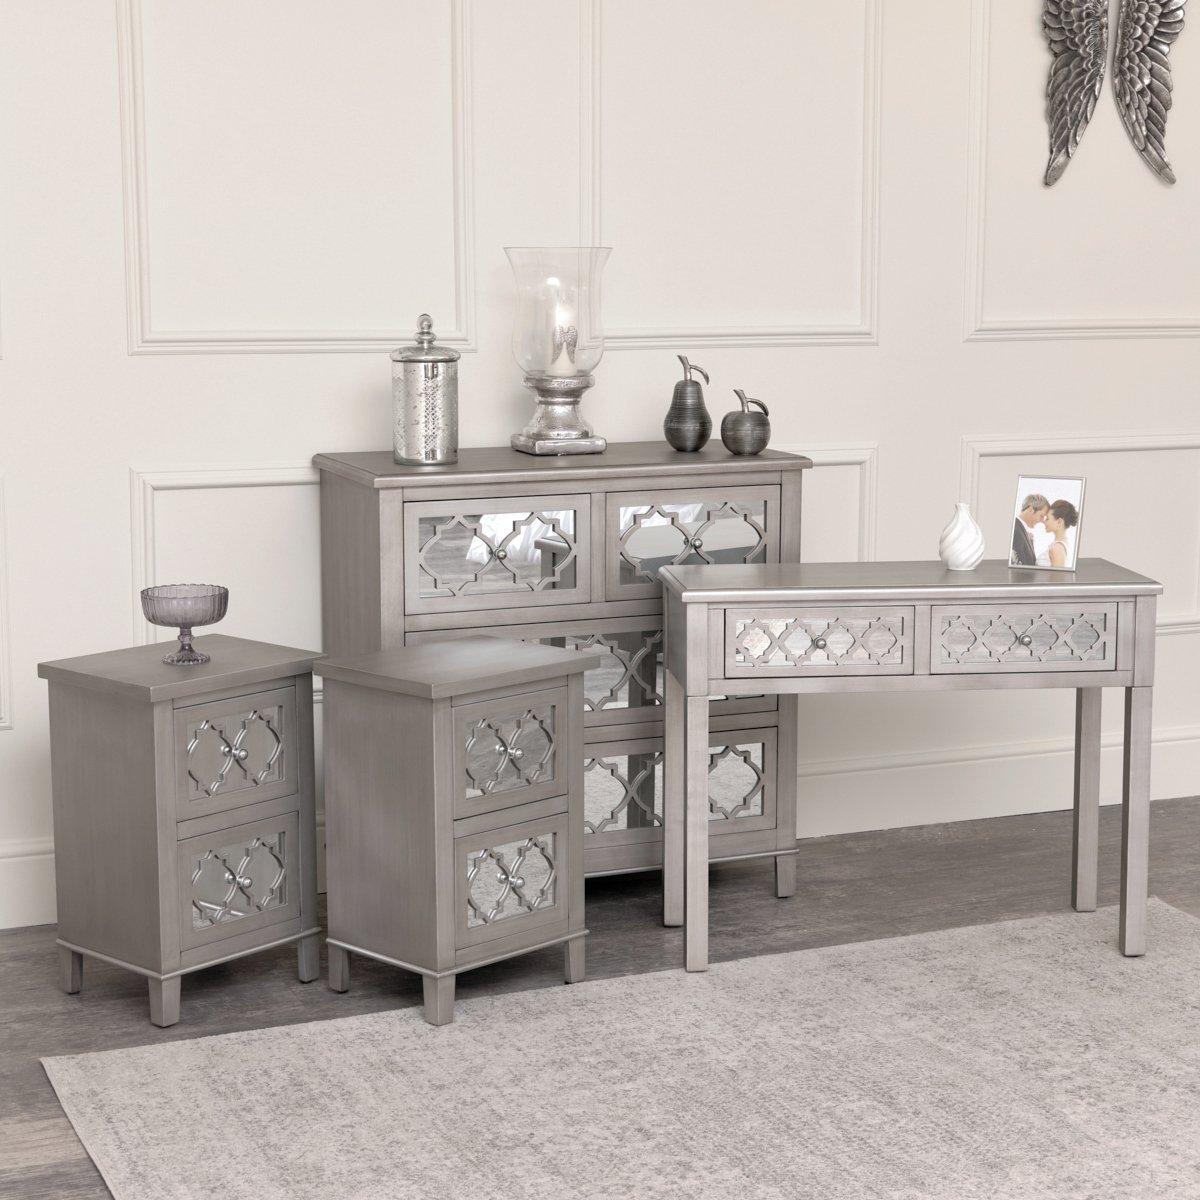 Large Silver Mirrored Chest Of Drawers, Console / Dressing Table & Pair Of Bedside Tables - Sabrina 